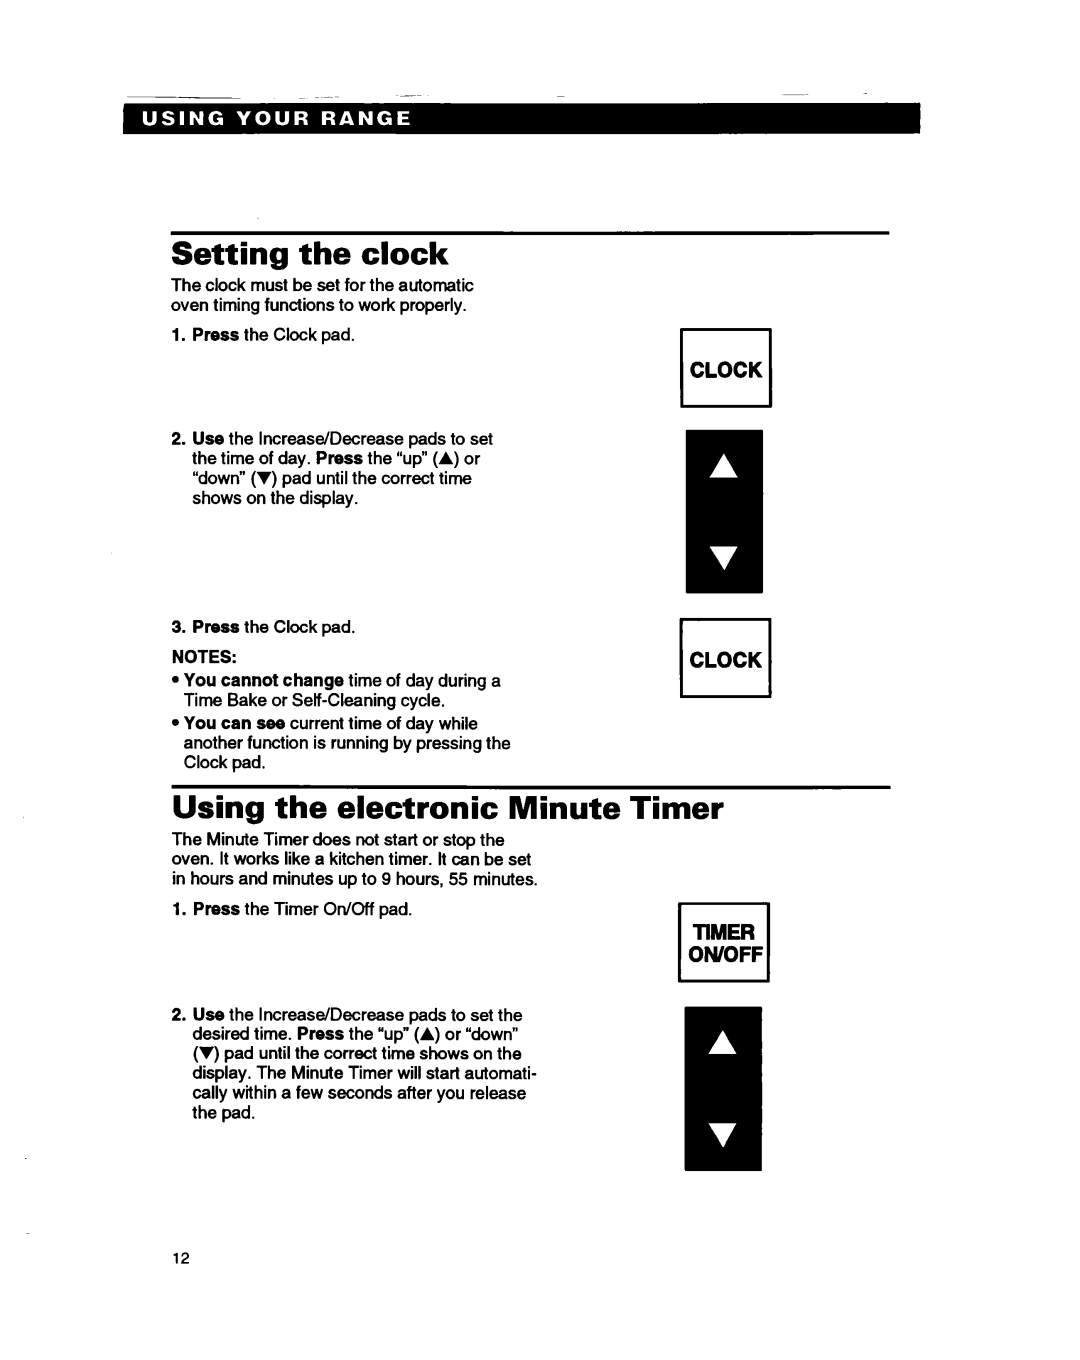 Whirlpool RS385PXB, RS385PCB manual Setting the clock, Using the electronic Minute Timer, 0CLOCK LCLOCK, TIMER rl ON/OFF 